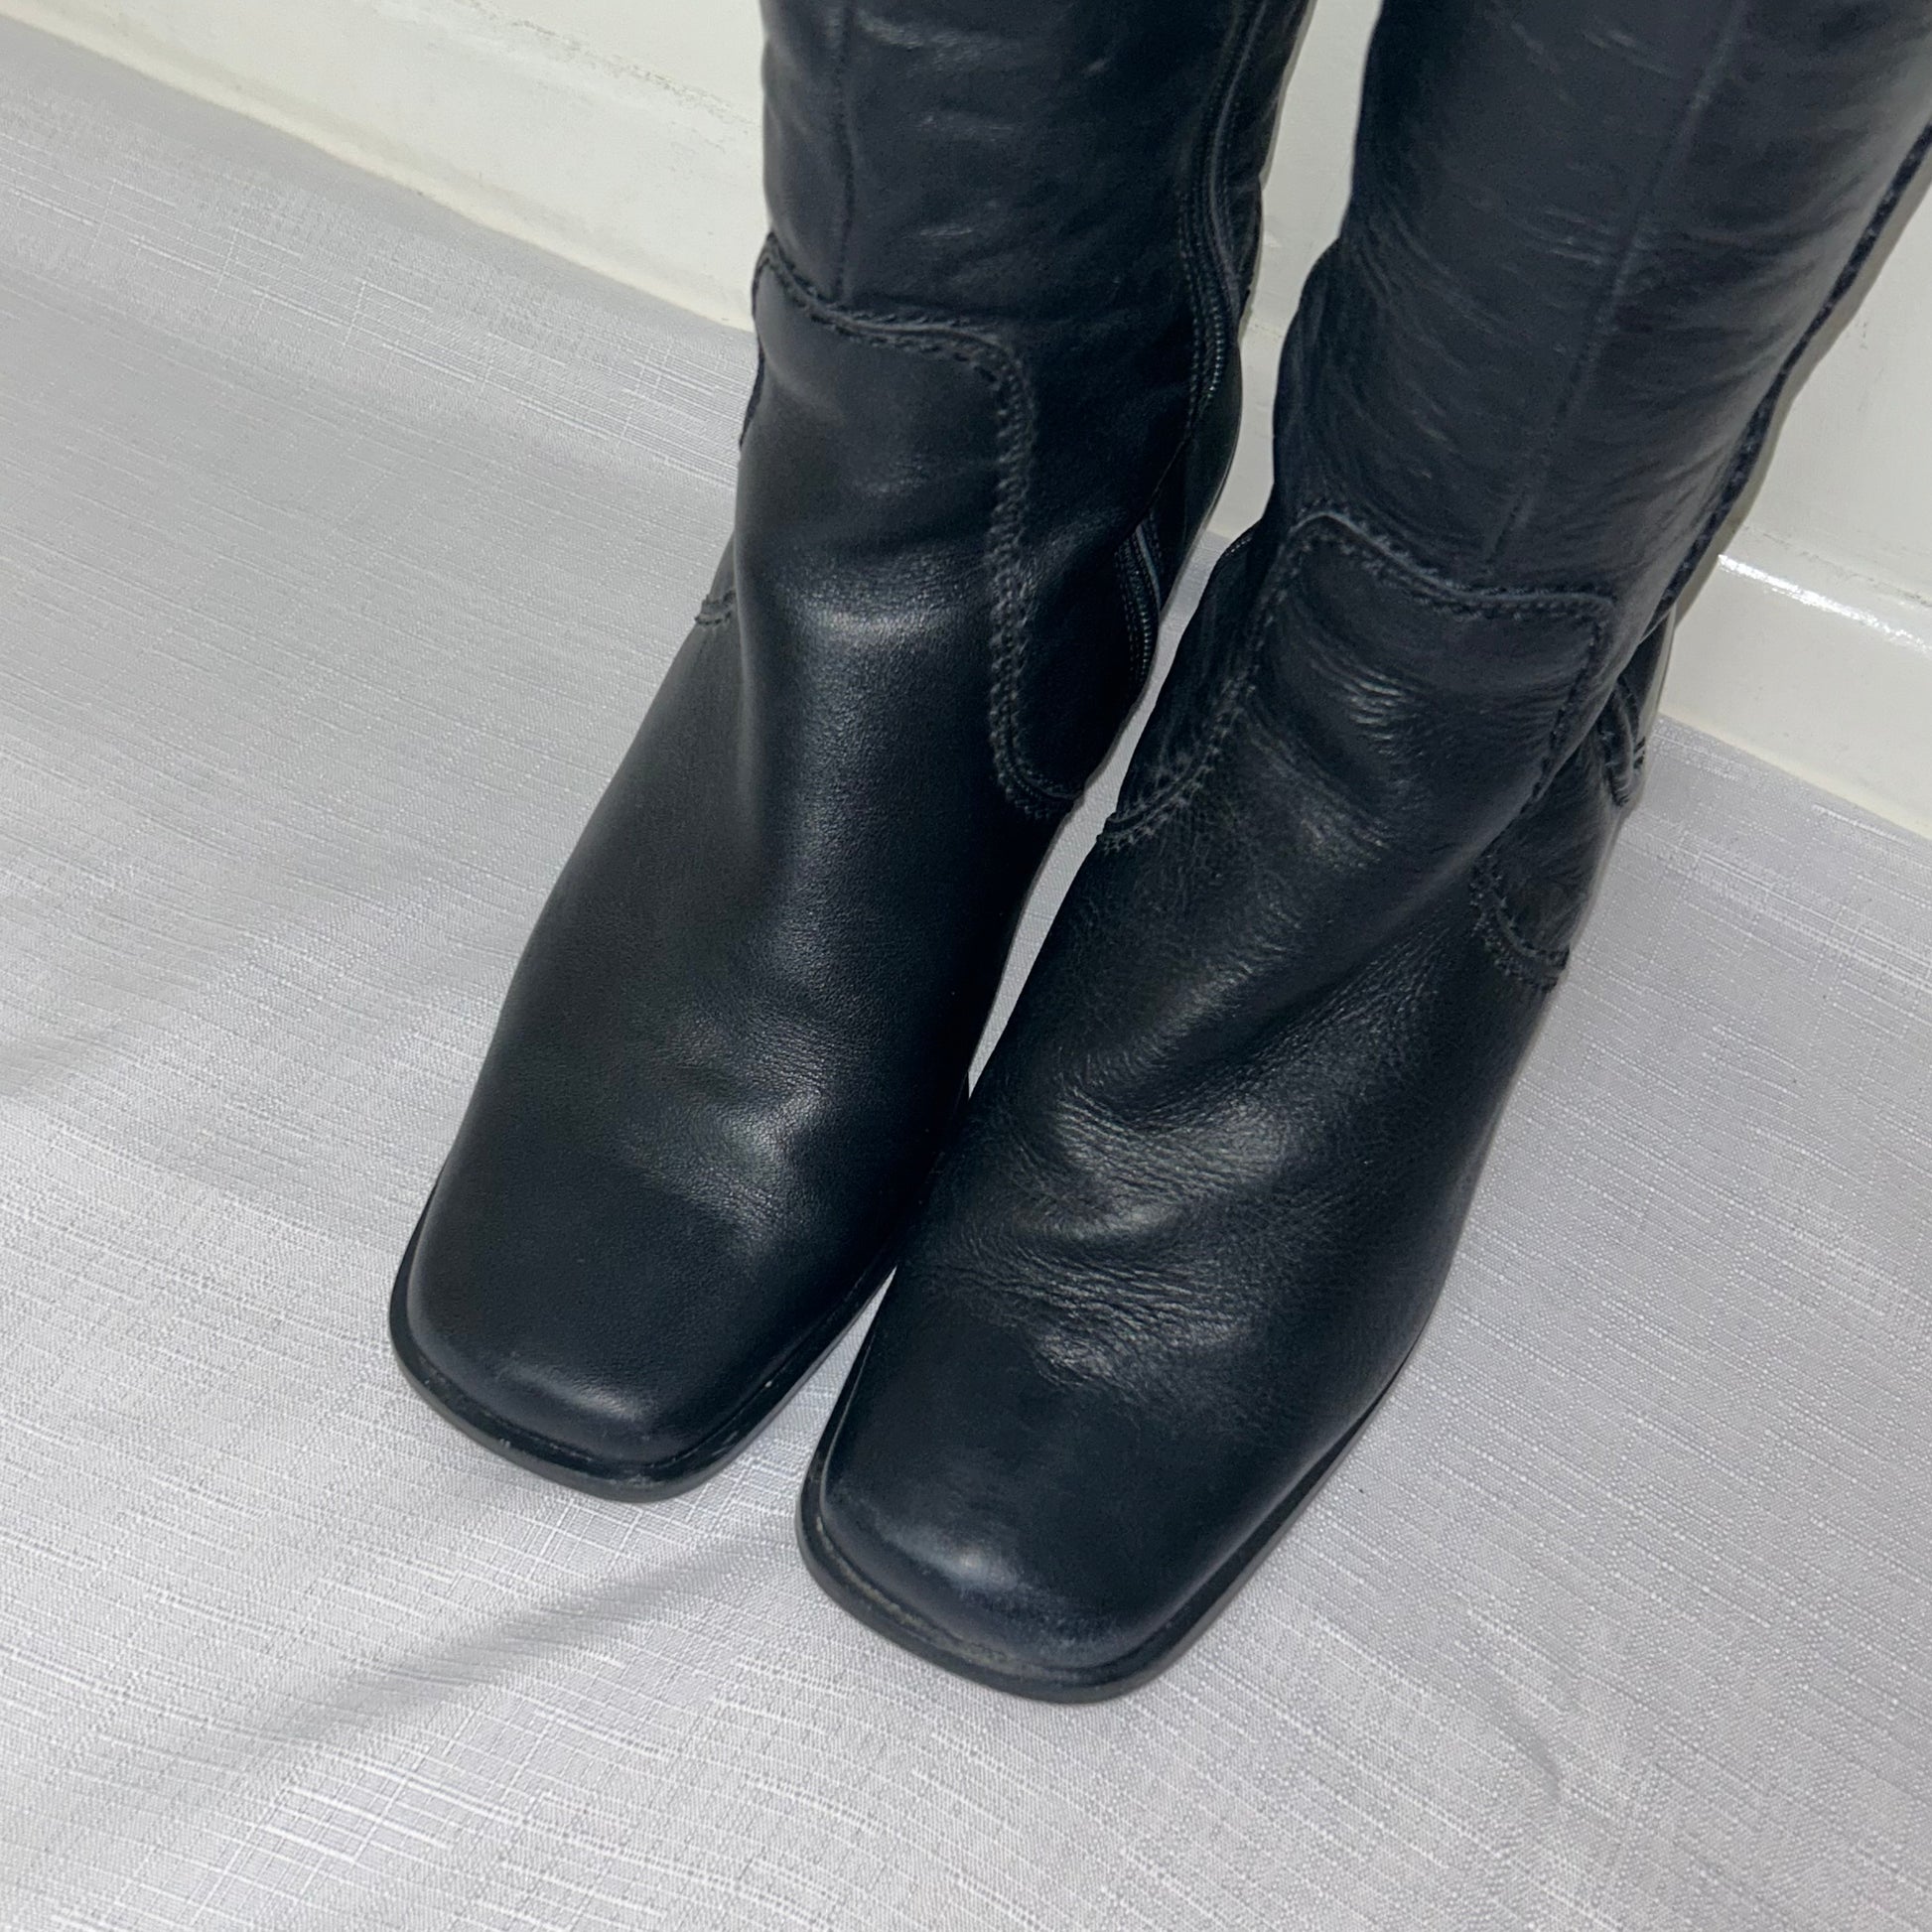 toes of black knee high boots shown on a white background